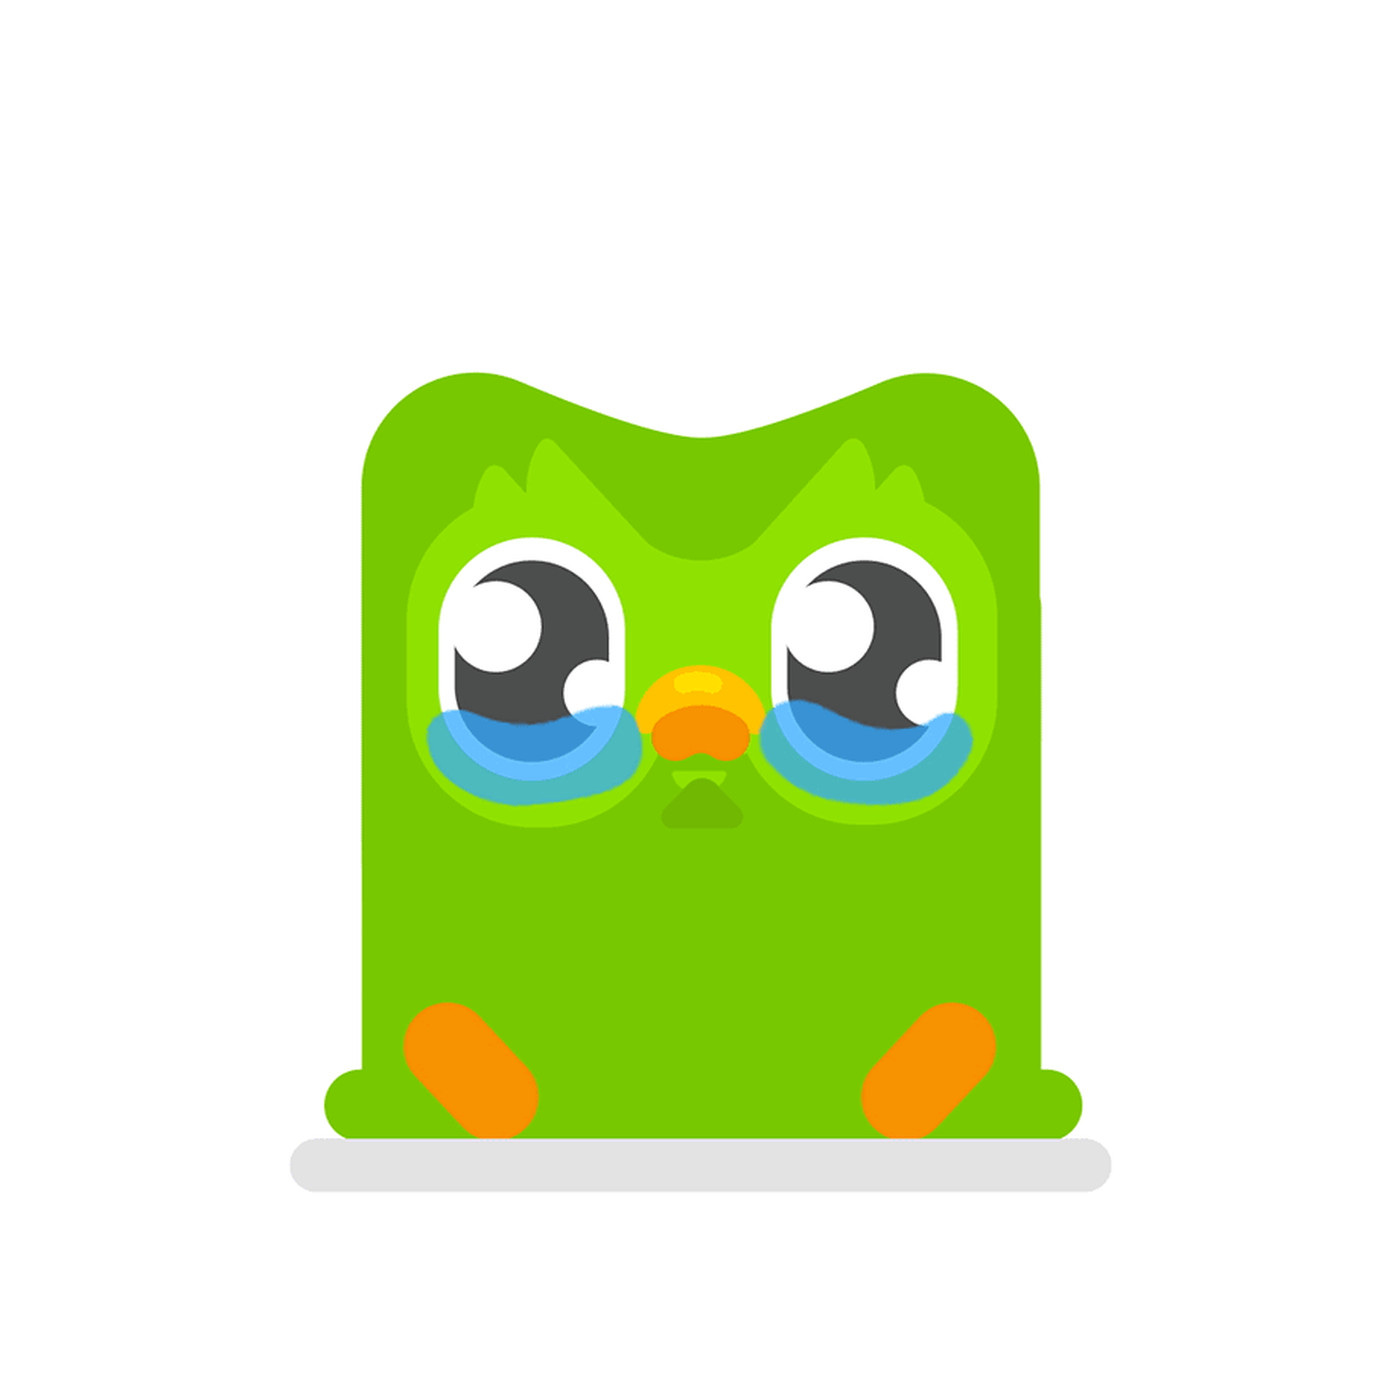 Duolingo redesigned its owl to guilt-trip you even harder - The Verge